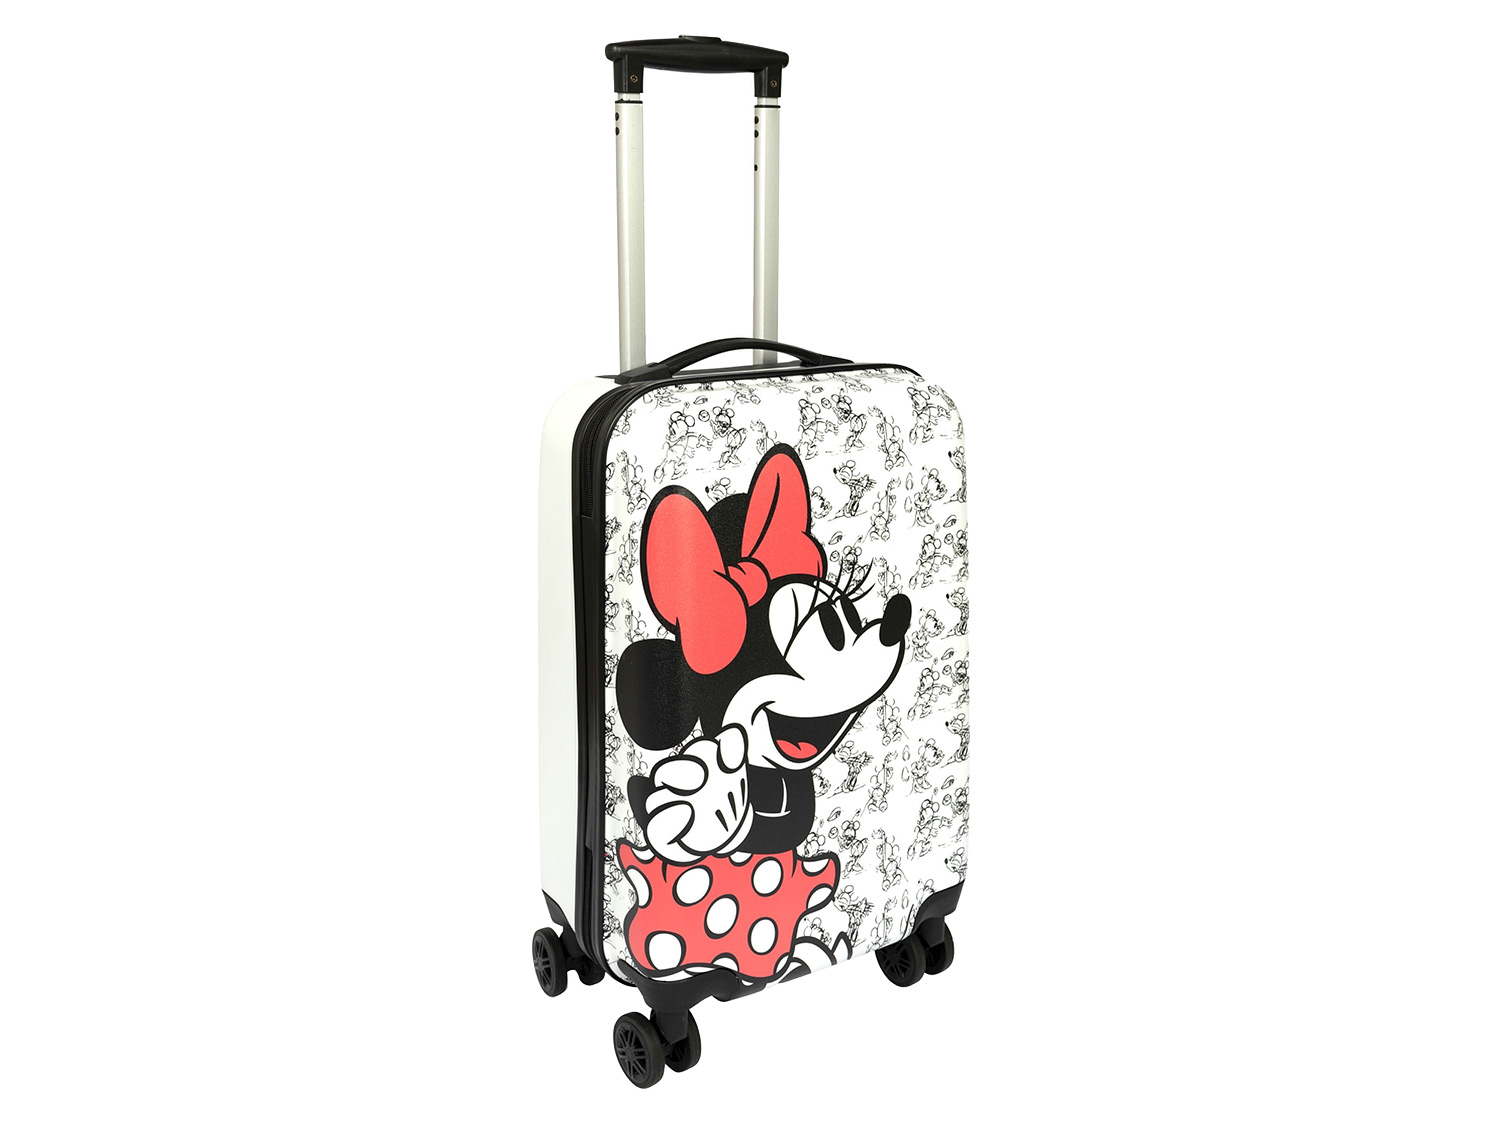 Undercover »Minnie Mouse« Polycarbonat Trolley 20', Koffer